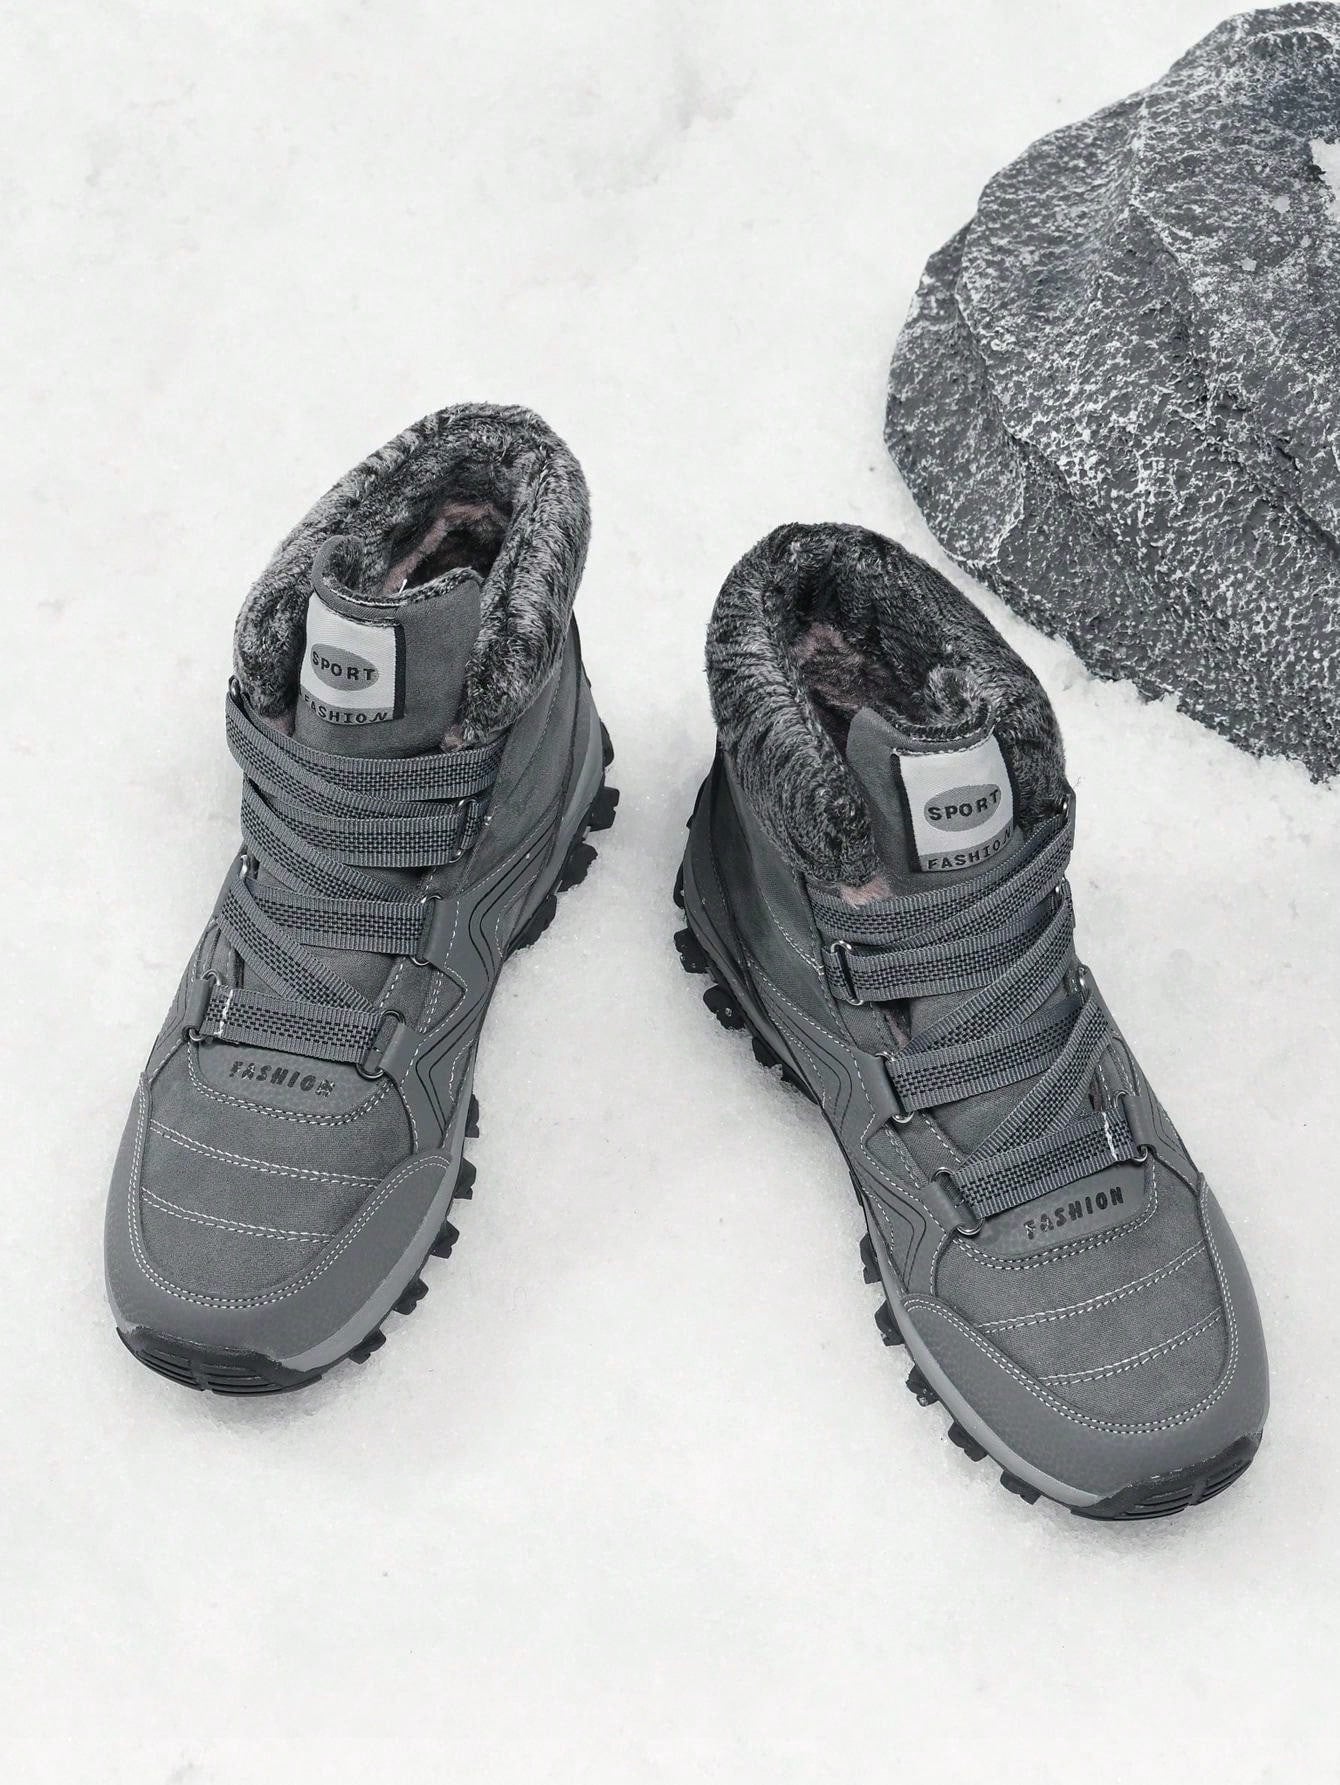 Men's Winter Outdoor Shoes, Running Shoes, Climbing Shoes, Non-slip, Warm Lined, Breathable, High Top, Snow Boots, Mountaineering And Hiking Shoes